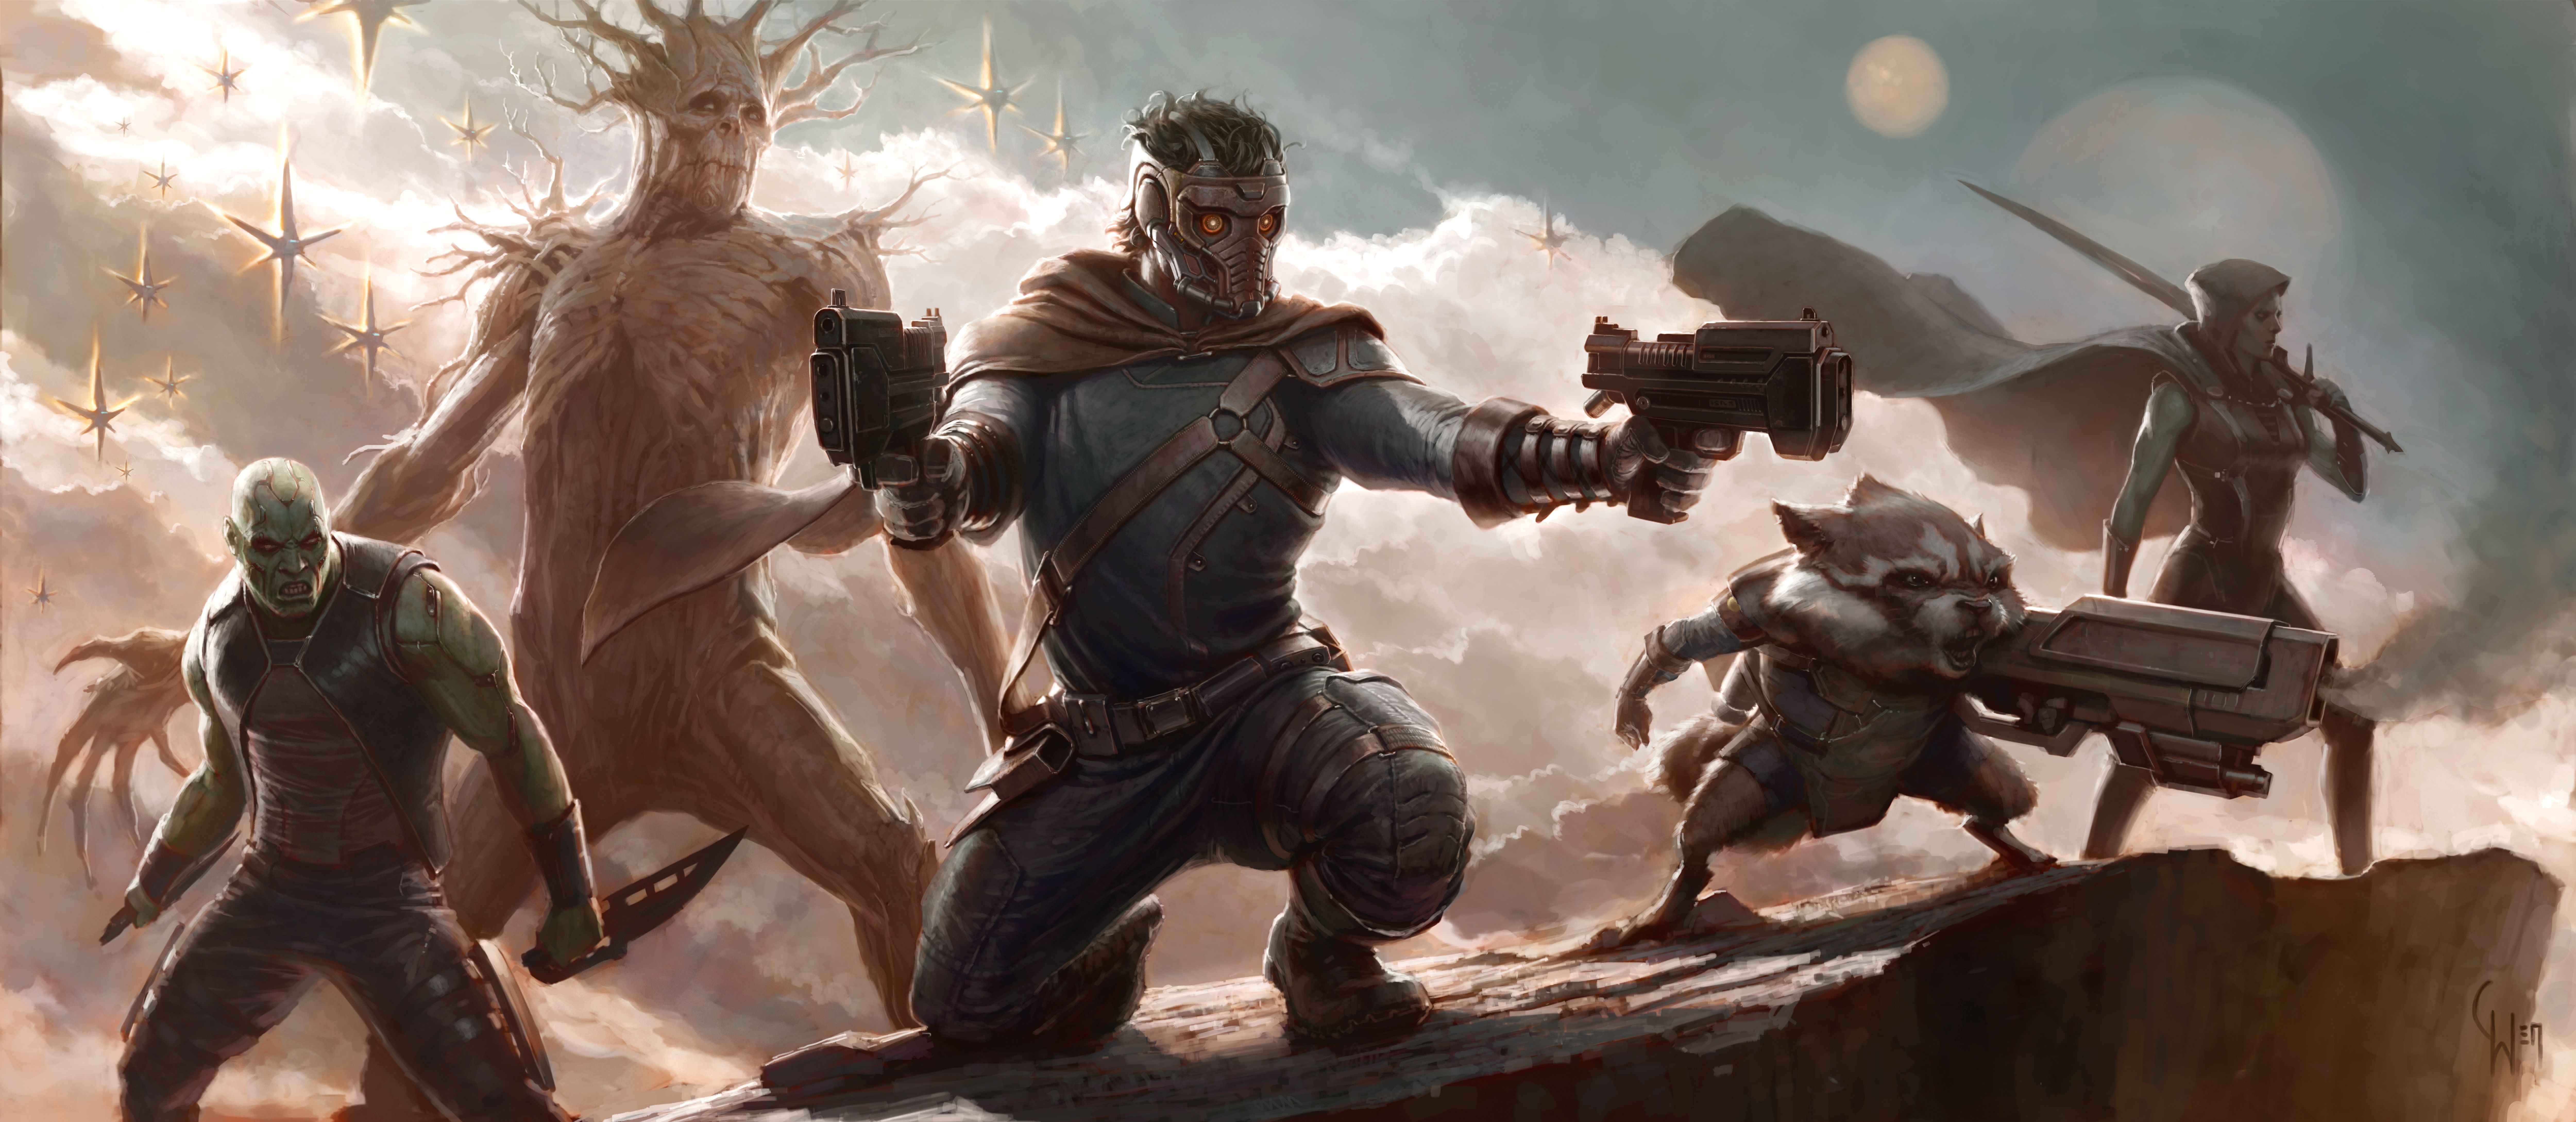 Guardians of the Galaxy Promo art